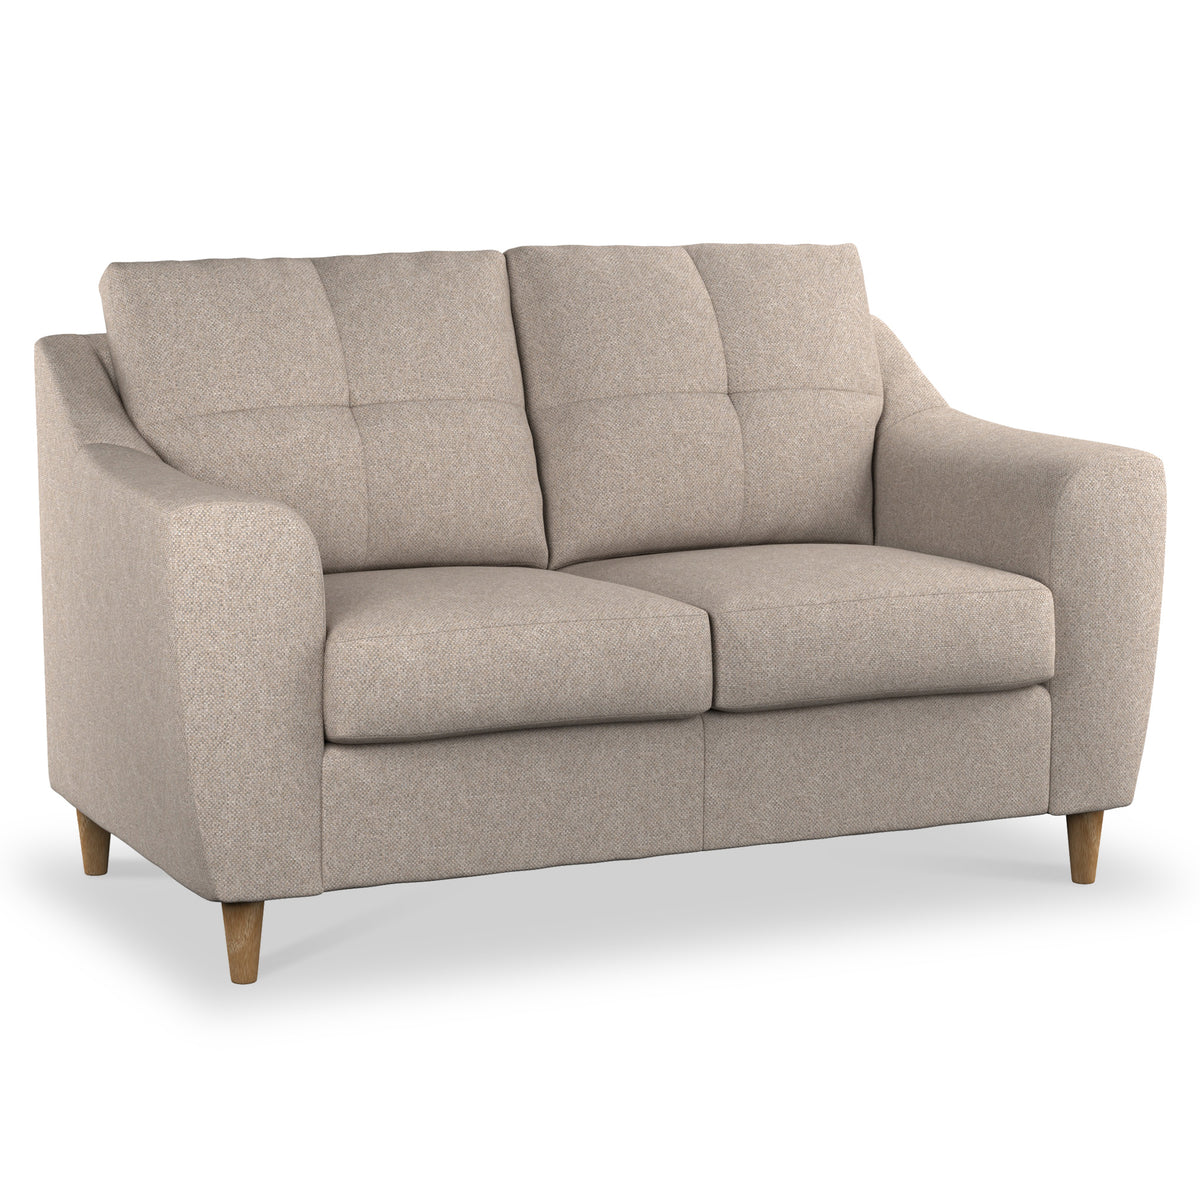 Justin Oatmeal 2 Seater Sofa from Roseland Furniture